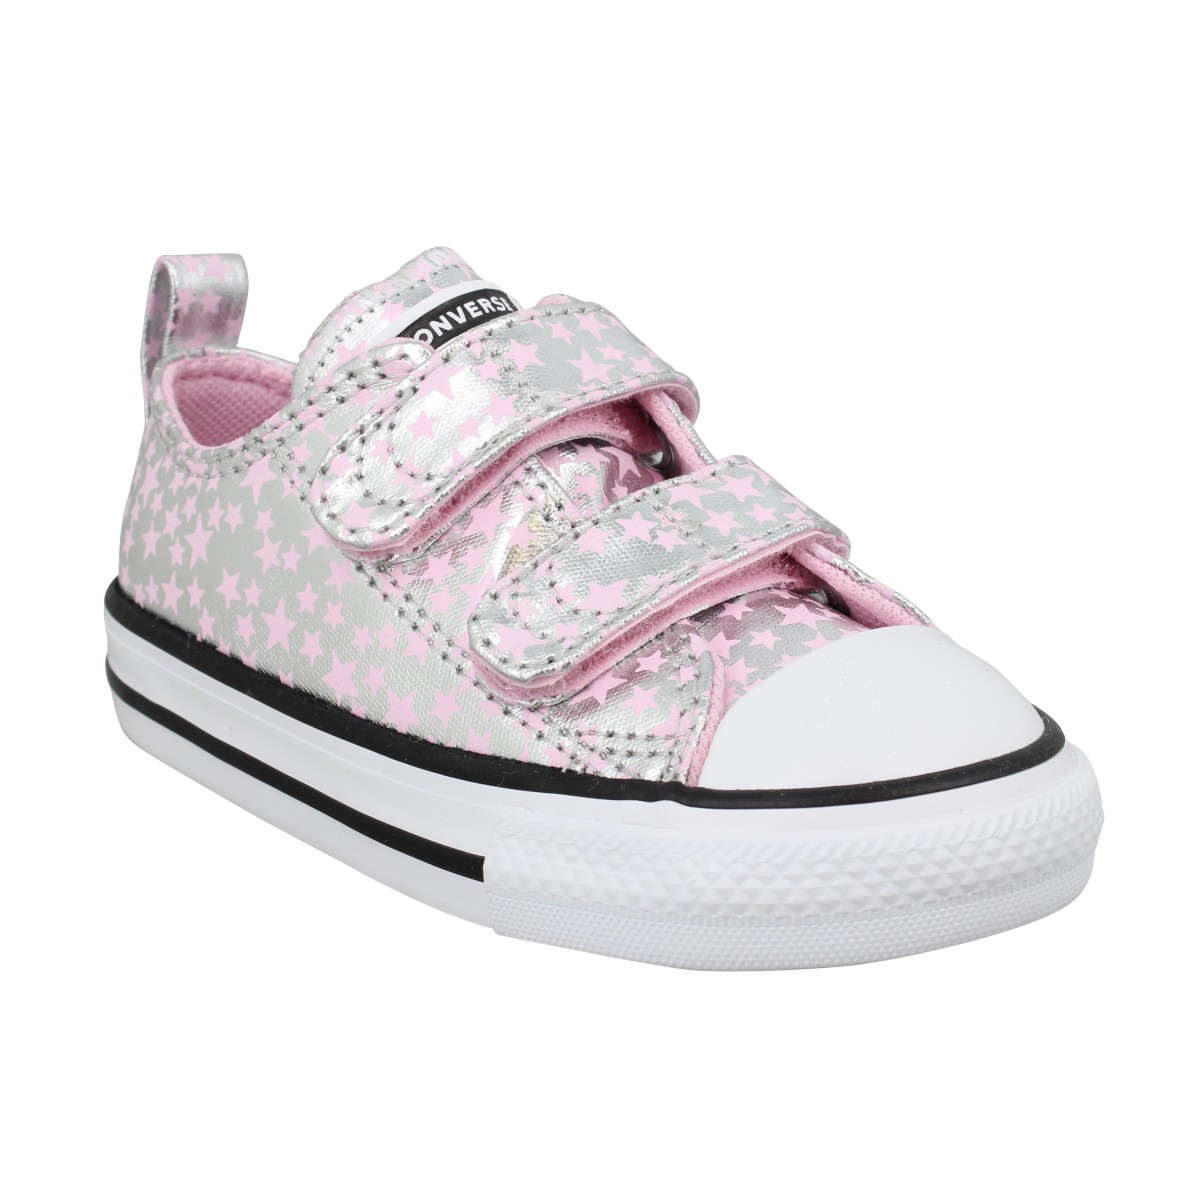 Baskets CONVERSE Chuck Taylor All Star 2V toile Enfant Pink Silver